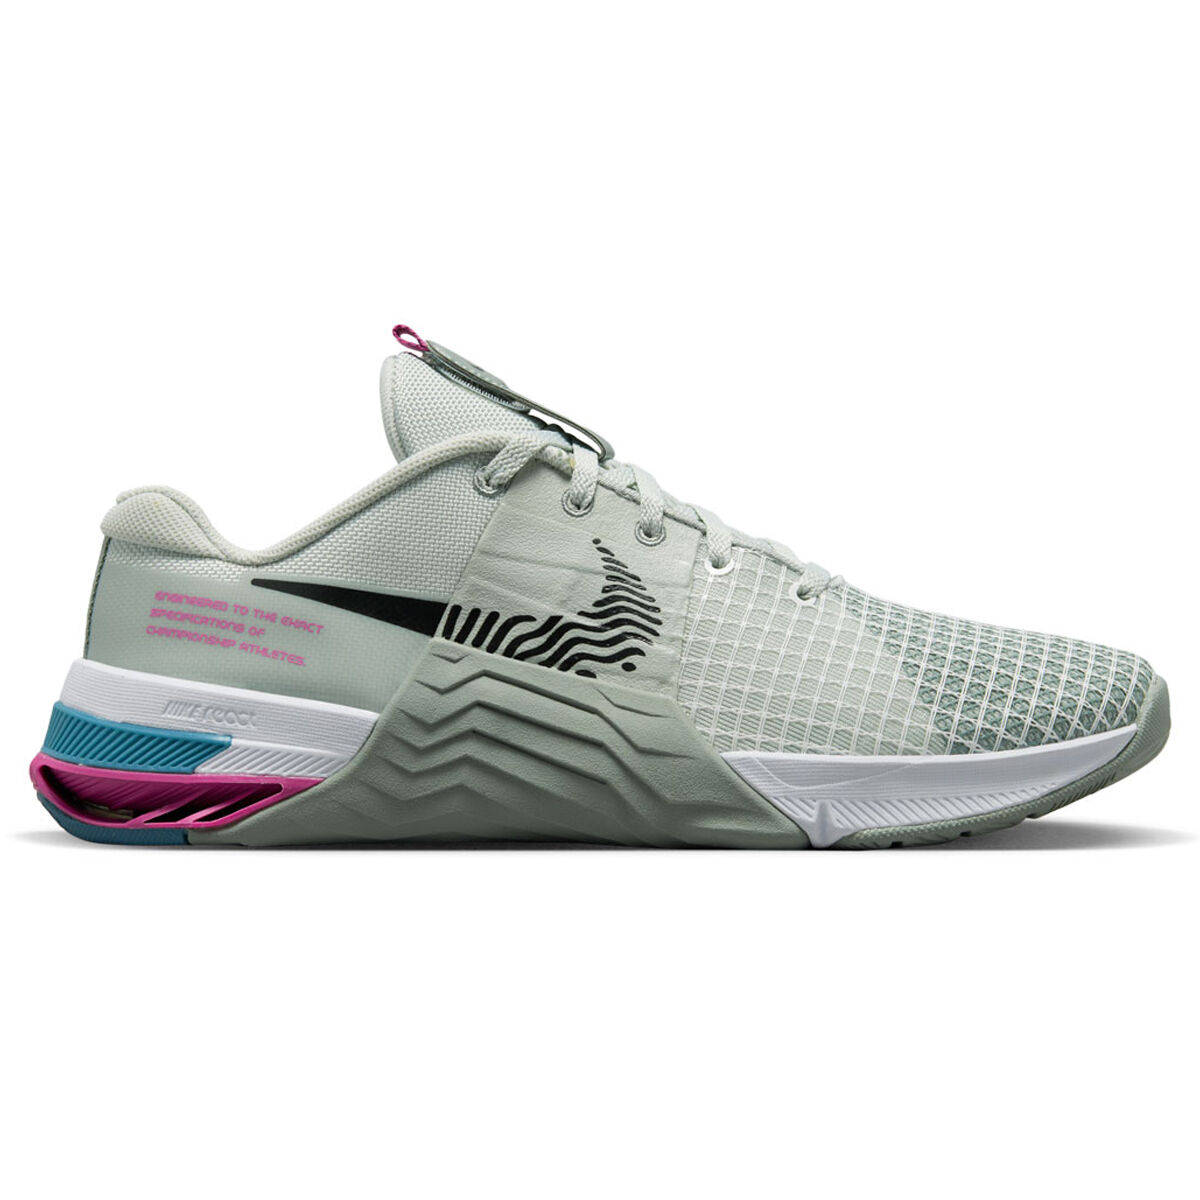 Nike Metcon Shoes - Nike Gym Shoes & Trainers - rebel